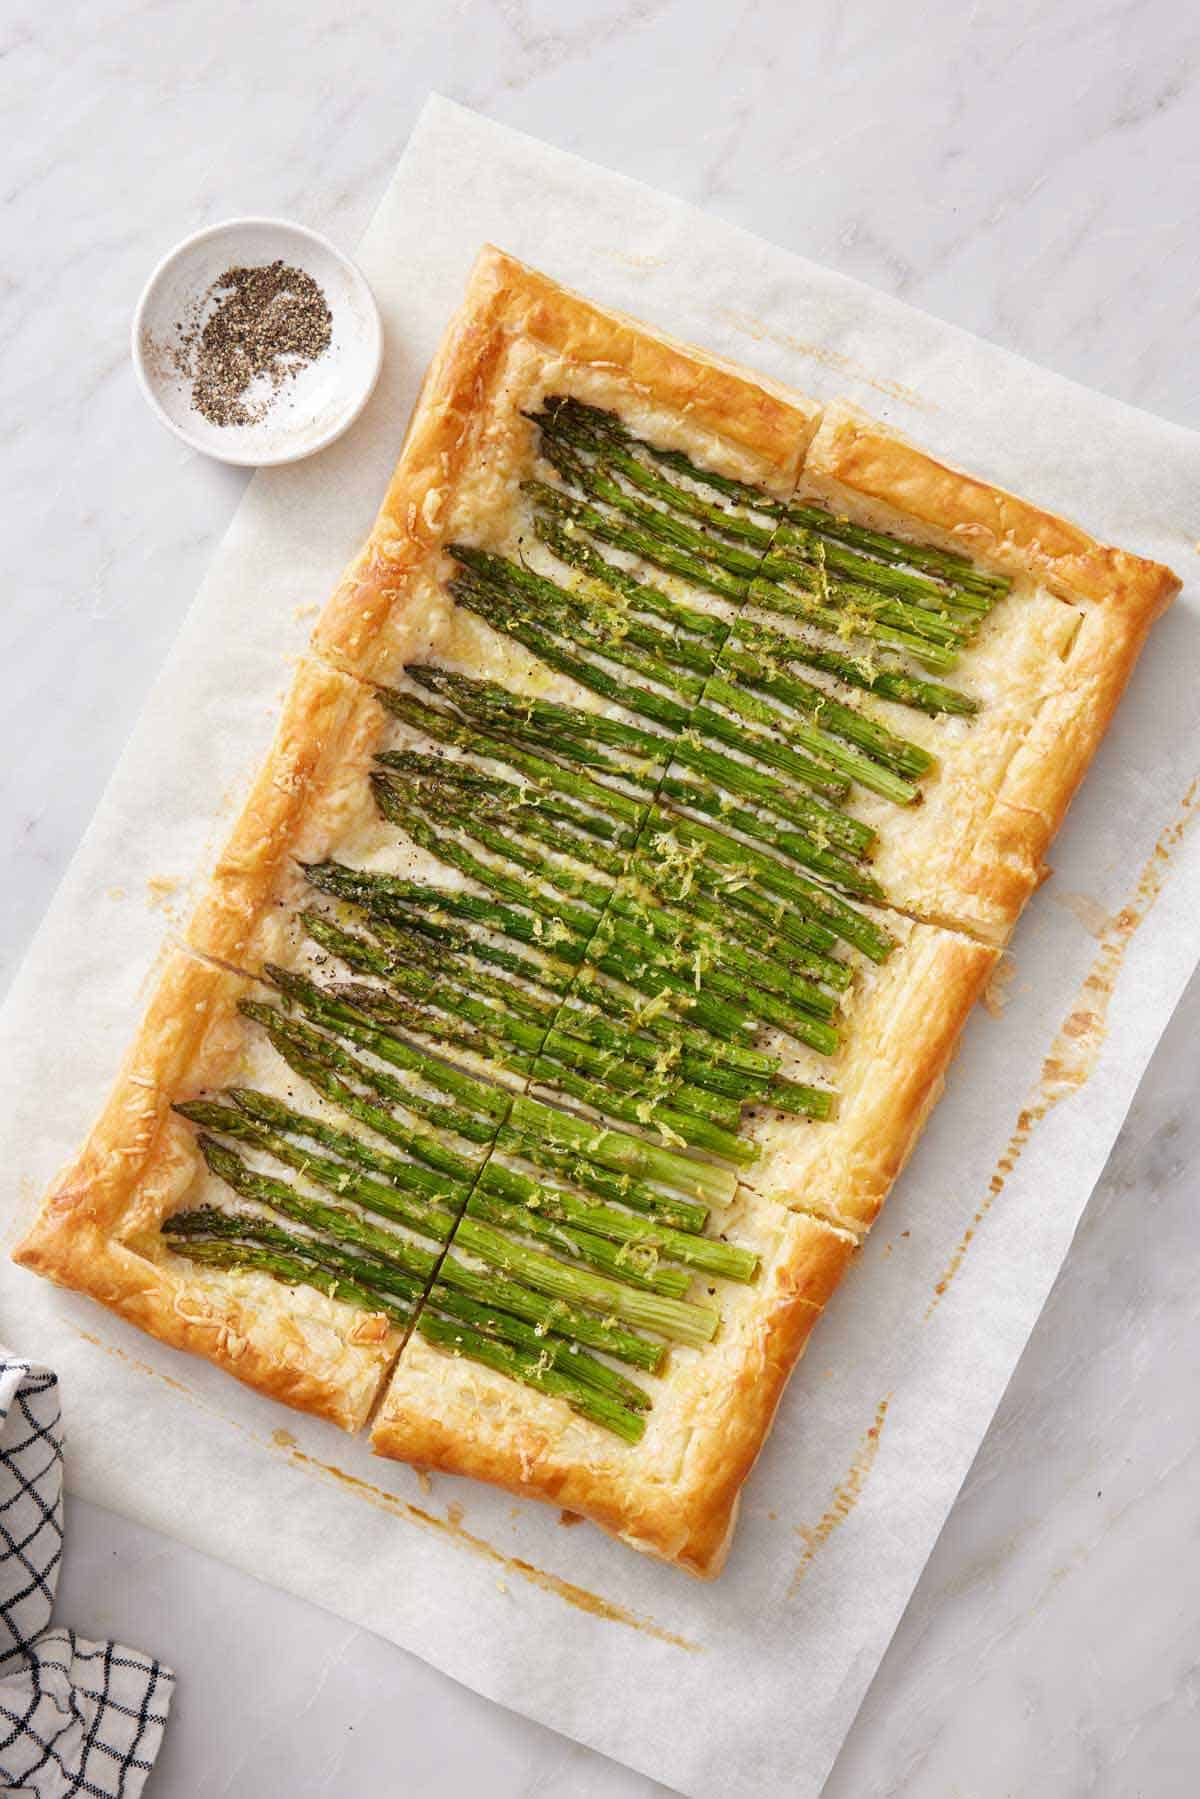 Overhead view of a cut asparagus tart on a sheet of parchment with a bowl of pepper on the side.